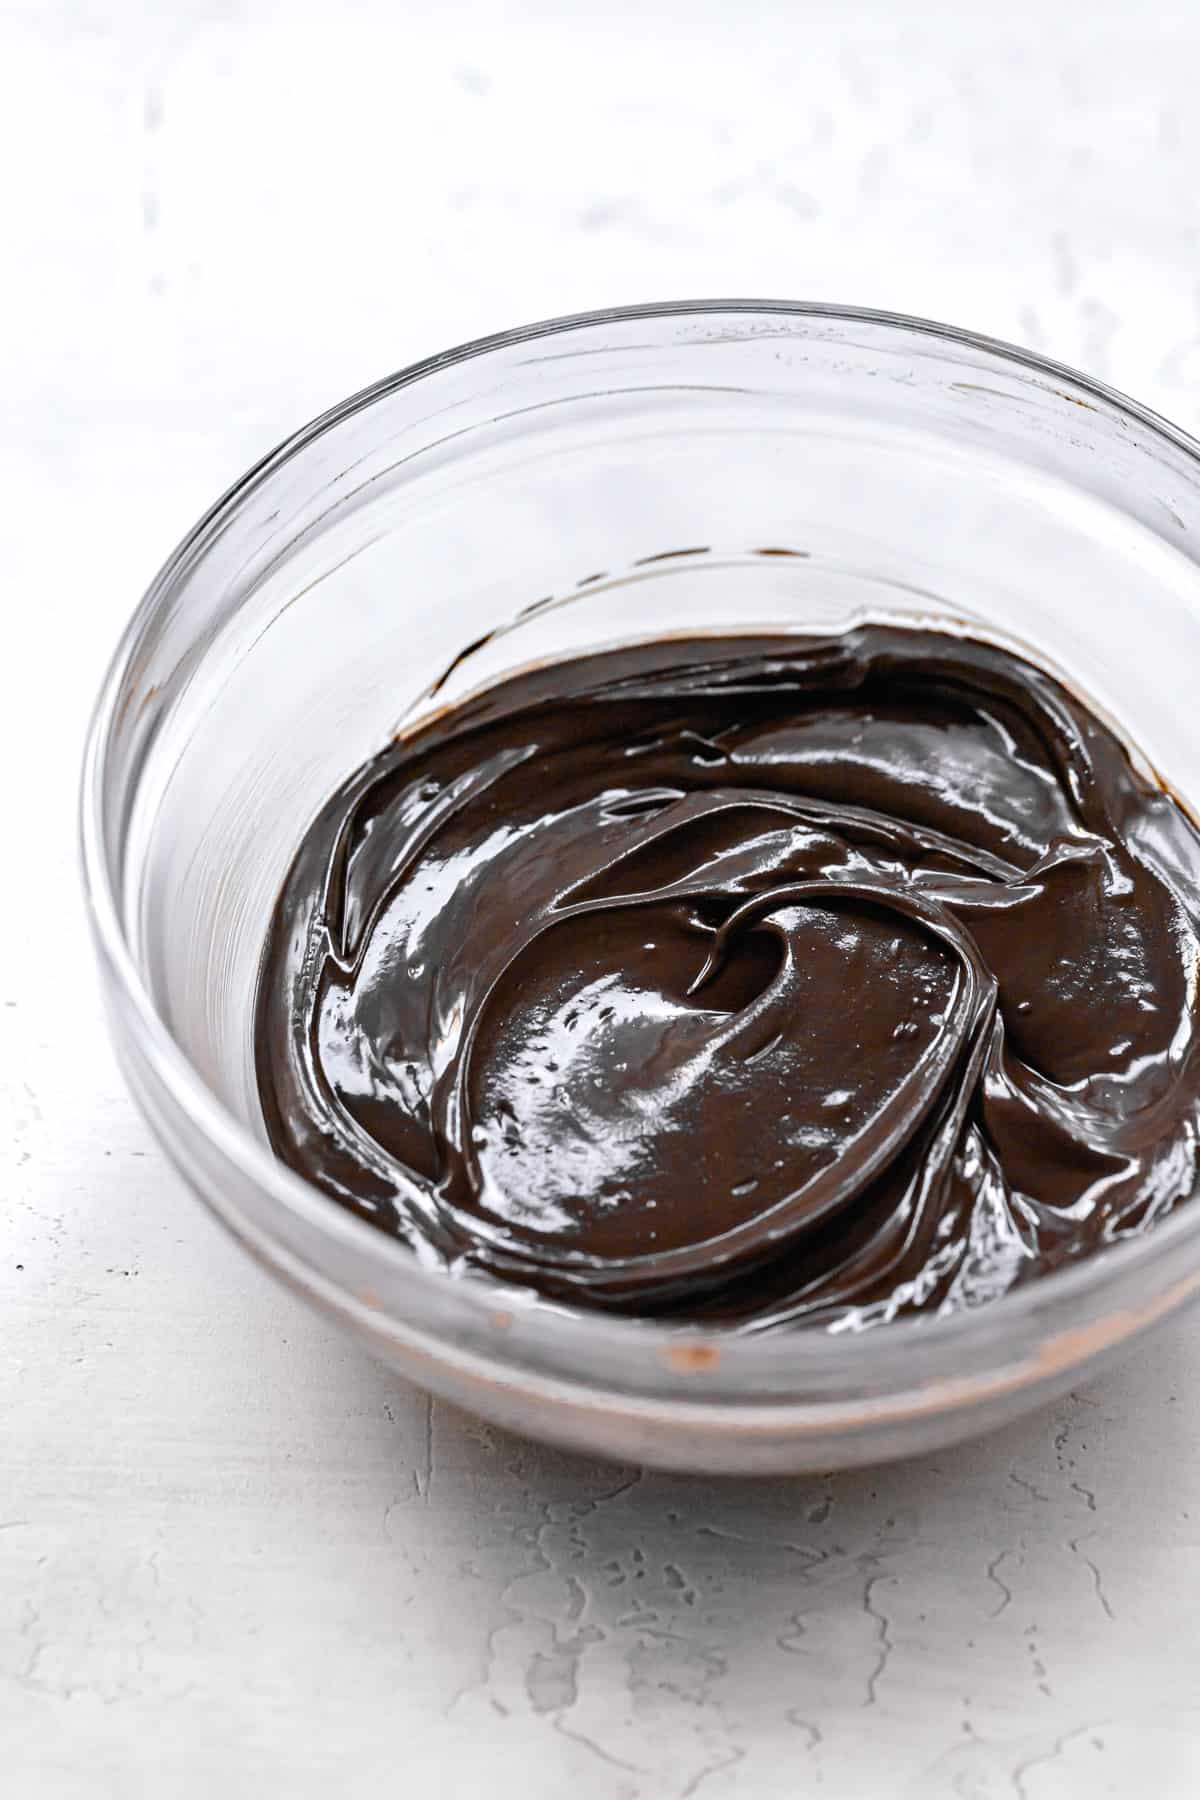 chocolate butter mixture in glass bowl.